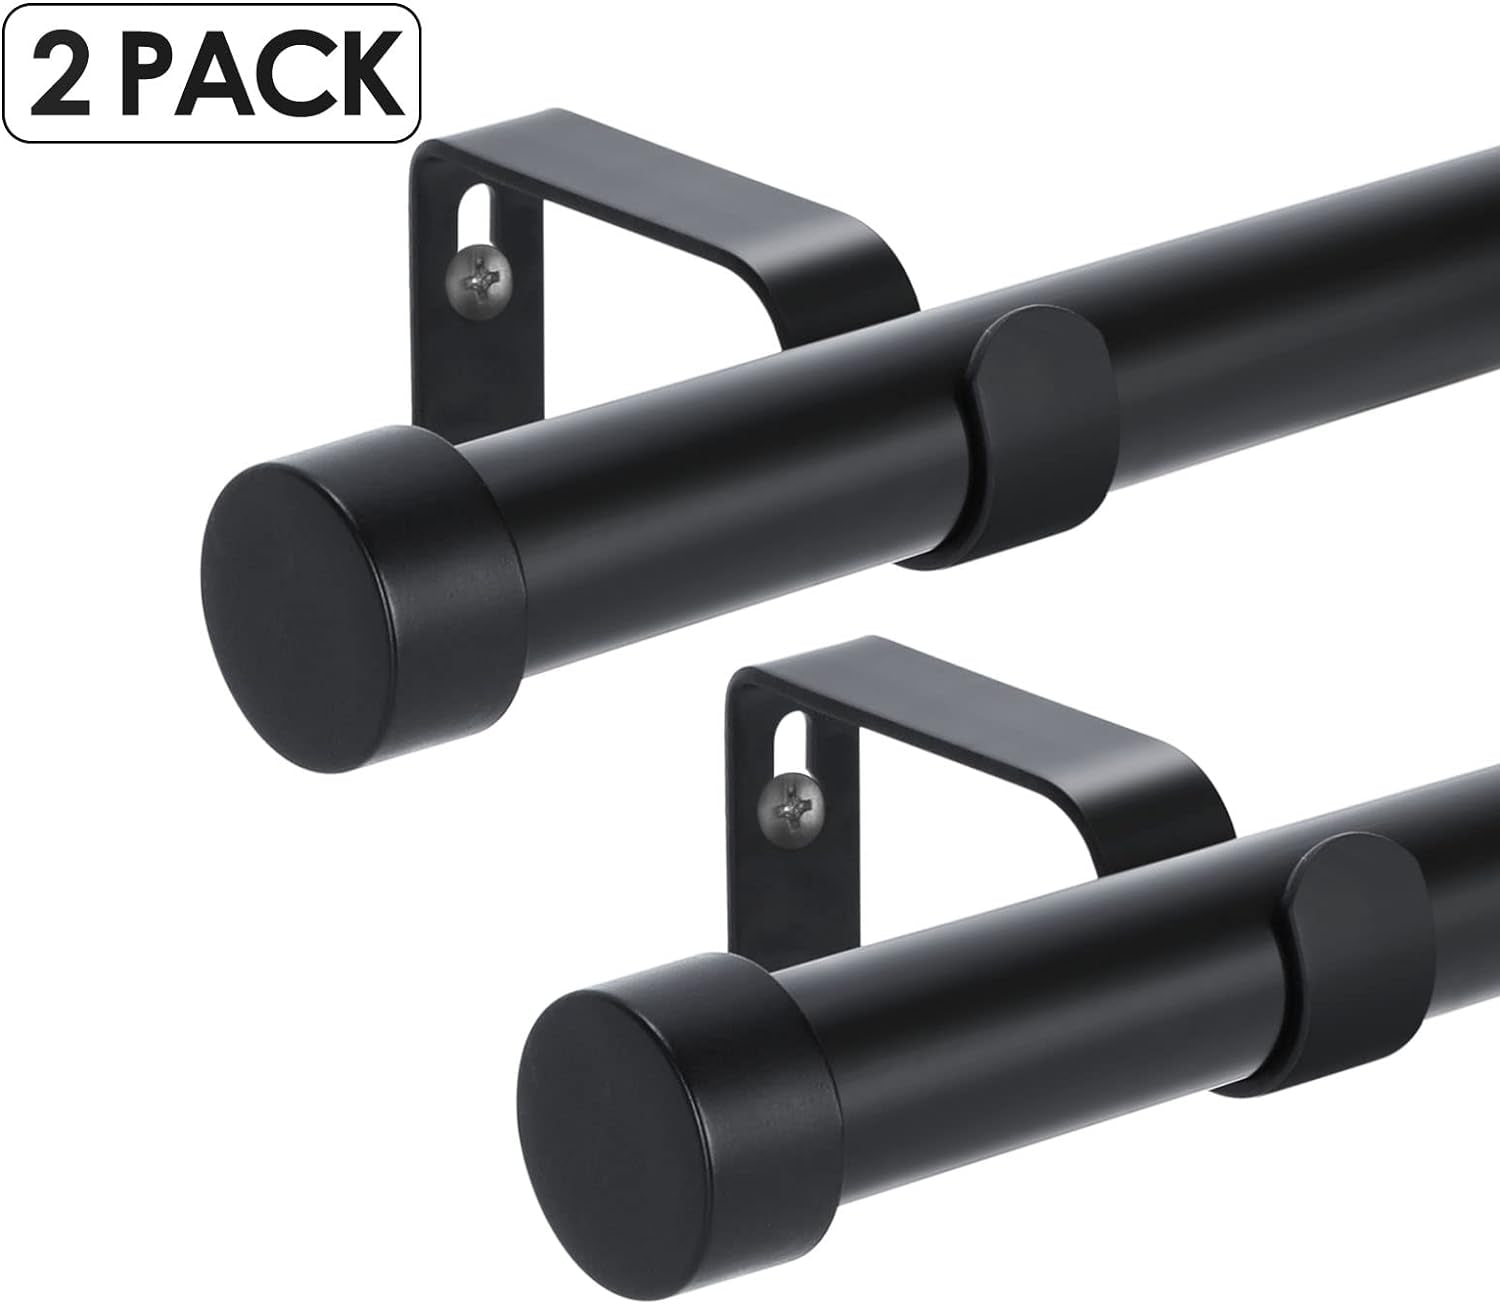 2 Pack Black Adjustable Curtain Rods with End Cap Design Finials,Drapery Rods of Window Treatment,1 Inch Diameter,Matte Black( 28-48 Inch)